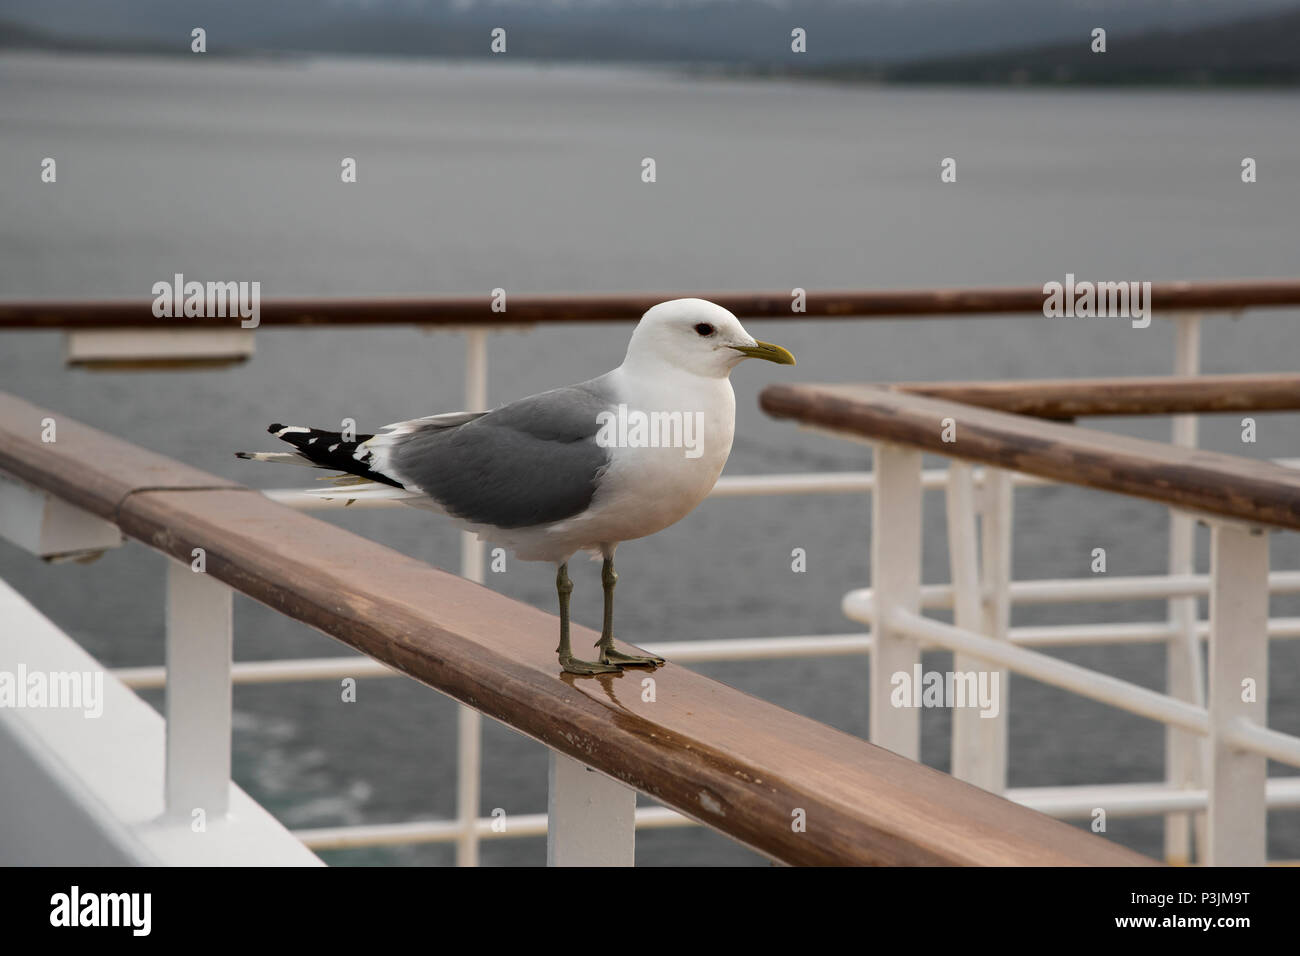 Common Gull sitting on the gunwale of cruise ship Mein Schiff 1 (old) in Grøtsundet north of  Tromsø in norhtern Norway. Stock Photo